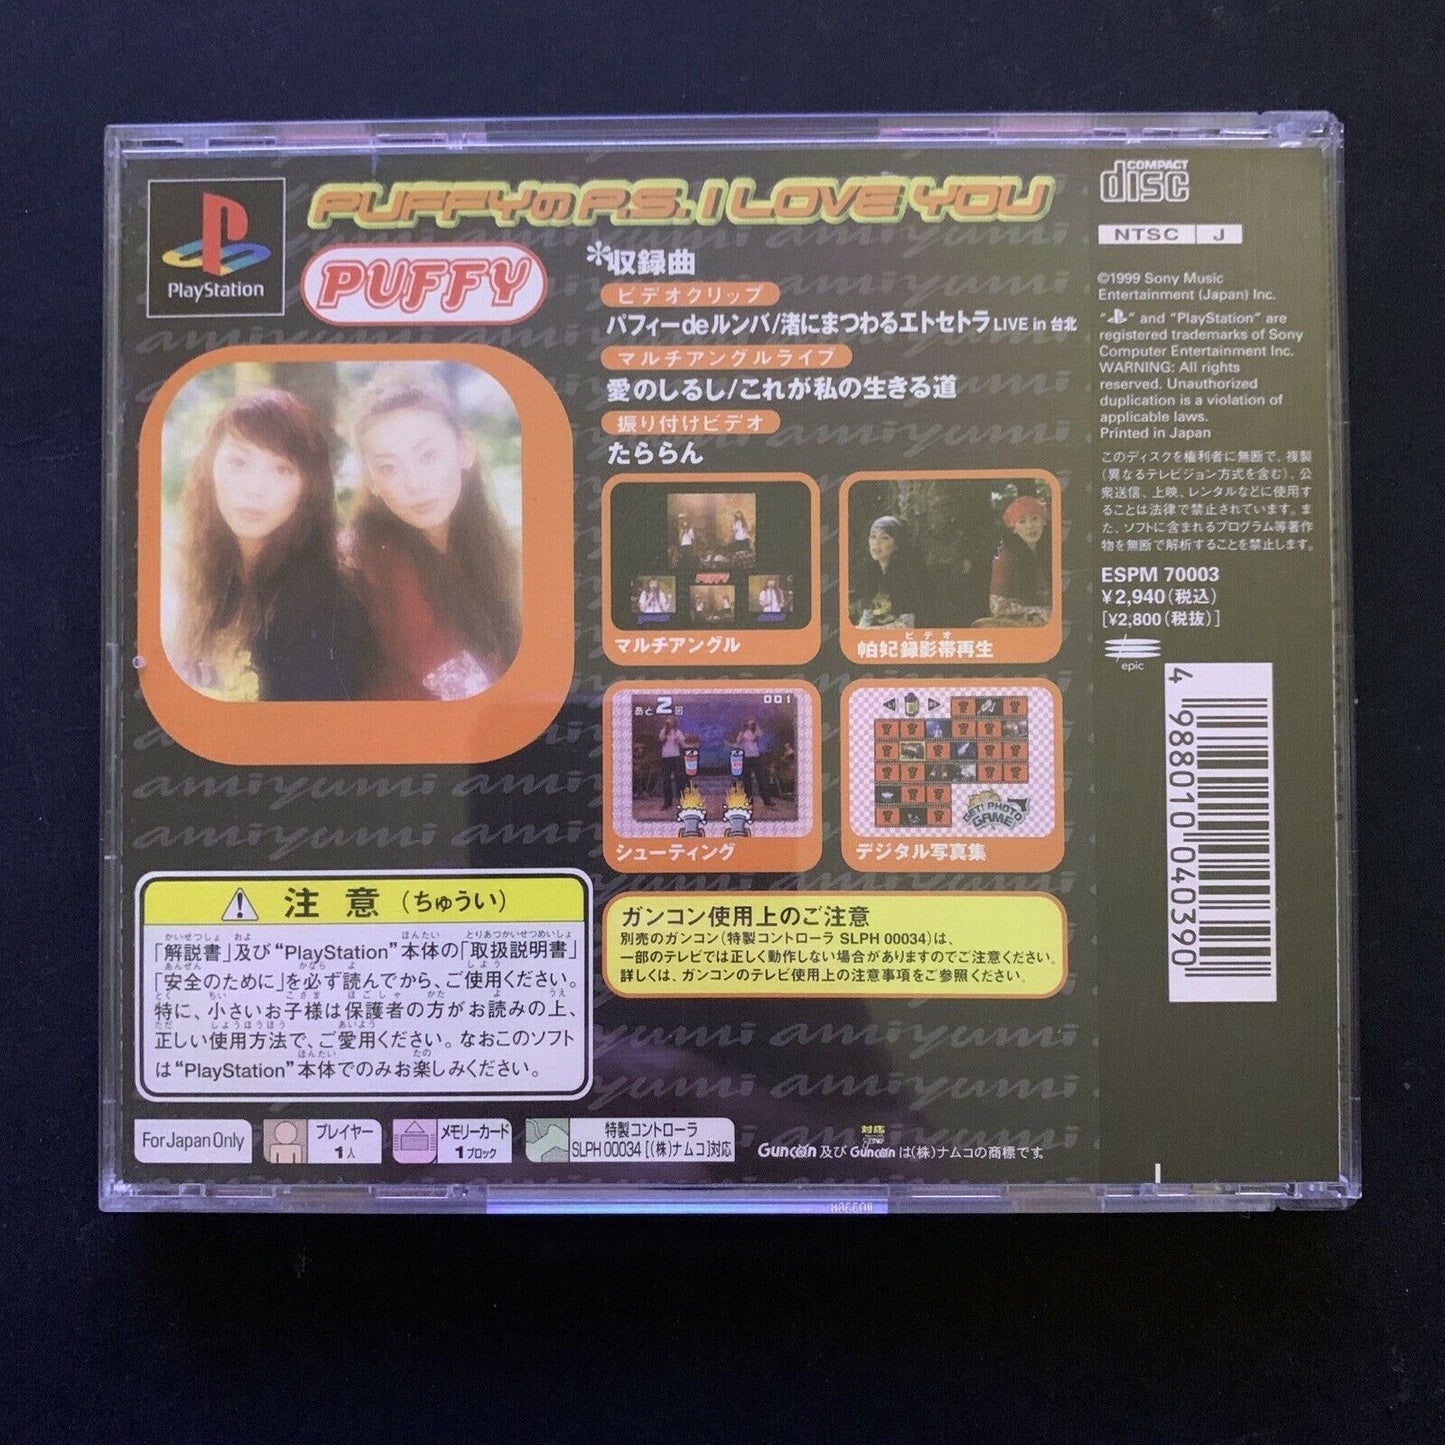 Puffy: P.S. I Love You - Sony Playstation PS1 NTSC-J Japan Game *Rare Sony Game!